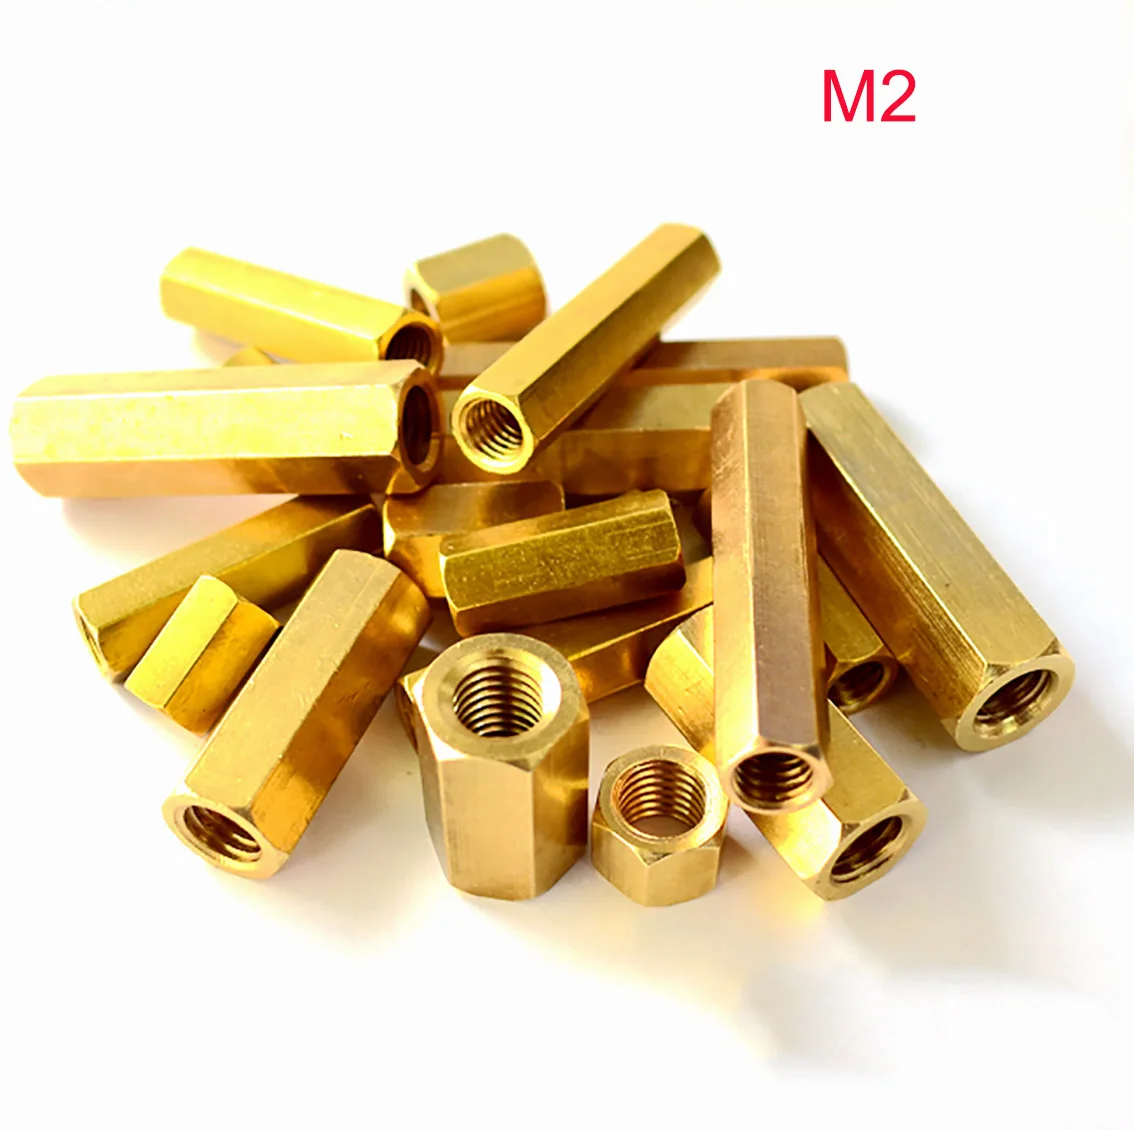 

10Pcs M2 Brass Hex Female To Female Standoff Spacer Column Hexagon Hand Knob Nuts PCB Motherboard DIY Model Parts